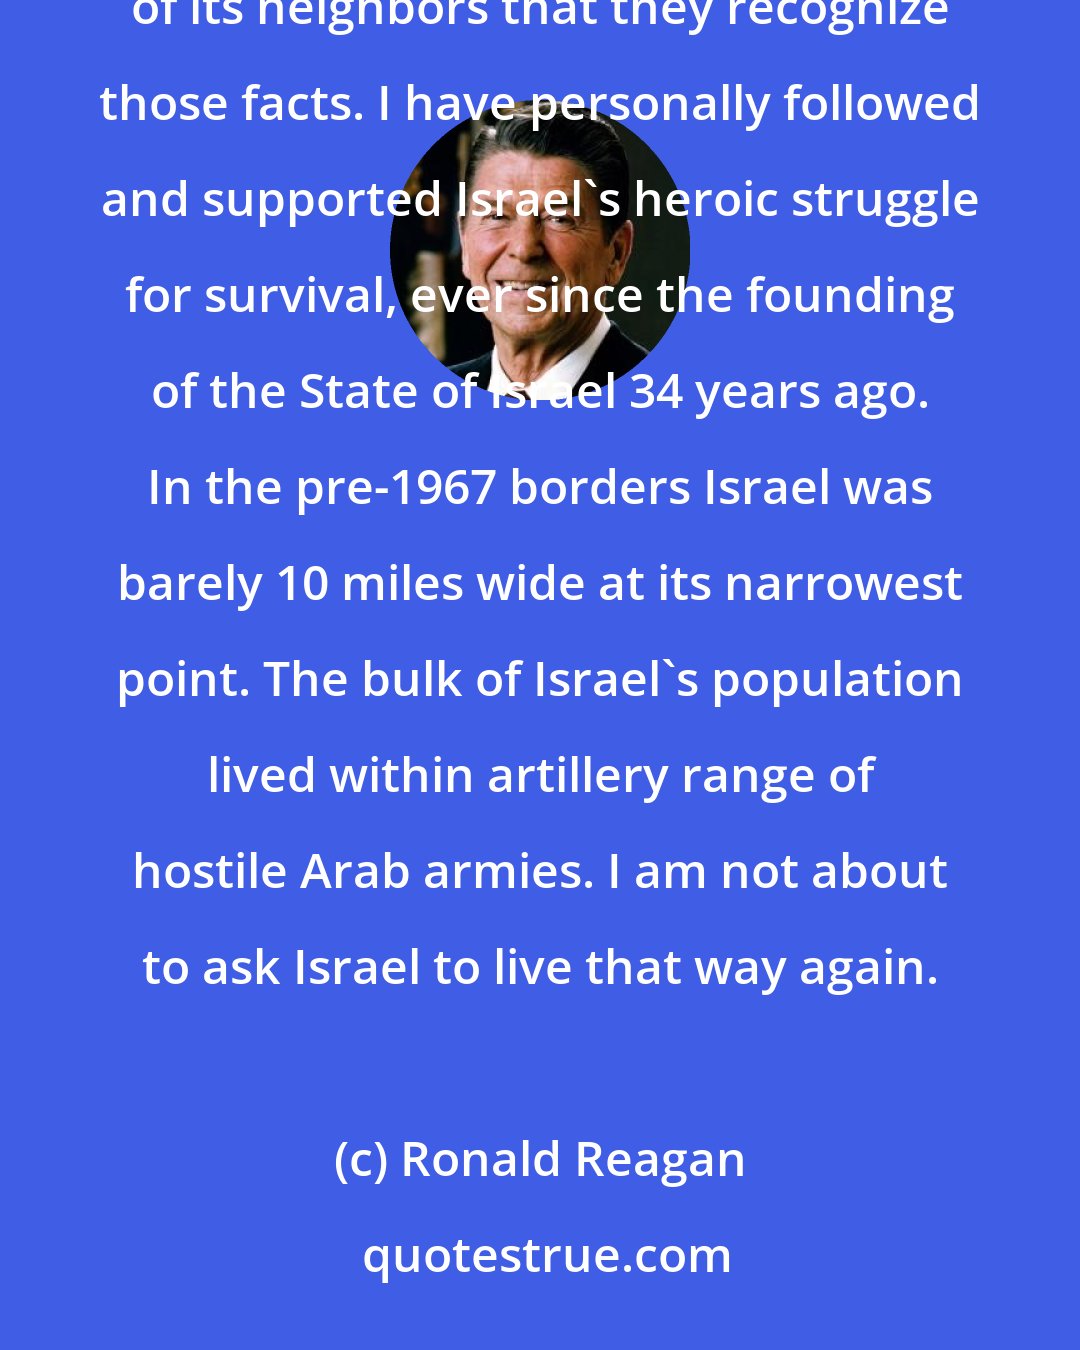 Ronald Reagan: Israel exists; it has a right to exist in peace behind secure and defensible borders; and it has a right to demand of its neighbors that they recognize those facts. I have personally followed and supported Israel's heroic struggle for survival, ever since the founding of the State of Israel 34 years ago. In the pre-1967 borders Israel was barely 10 miles wide at its narrowest point. The bulk of Israel's population lived within artillery range of hostile Arab armies. I am not about to ask Israel to live that way again.